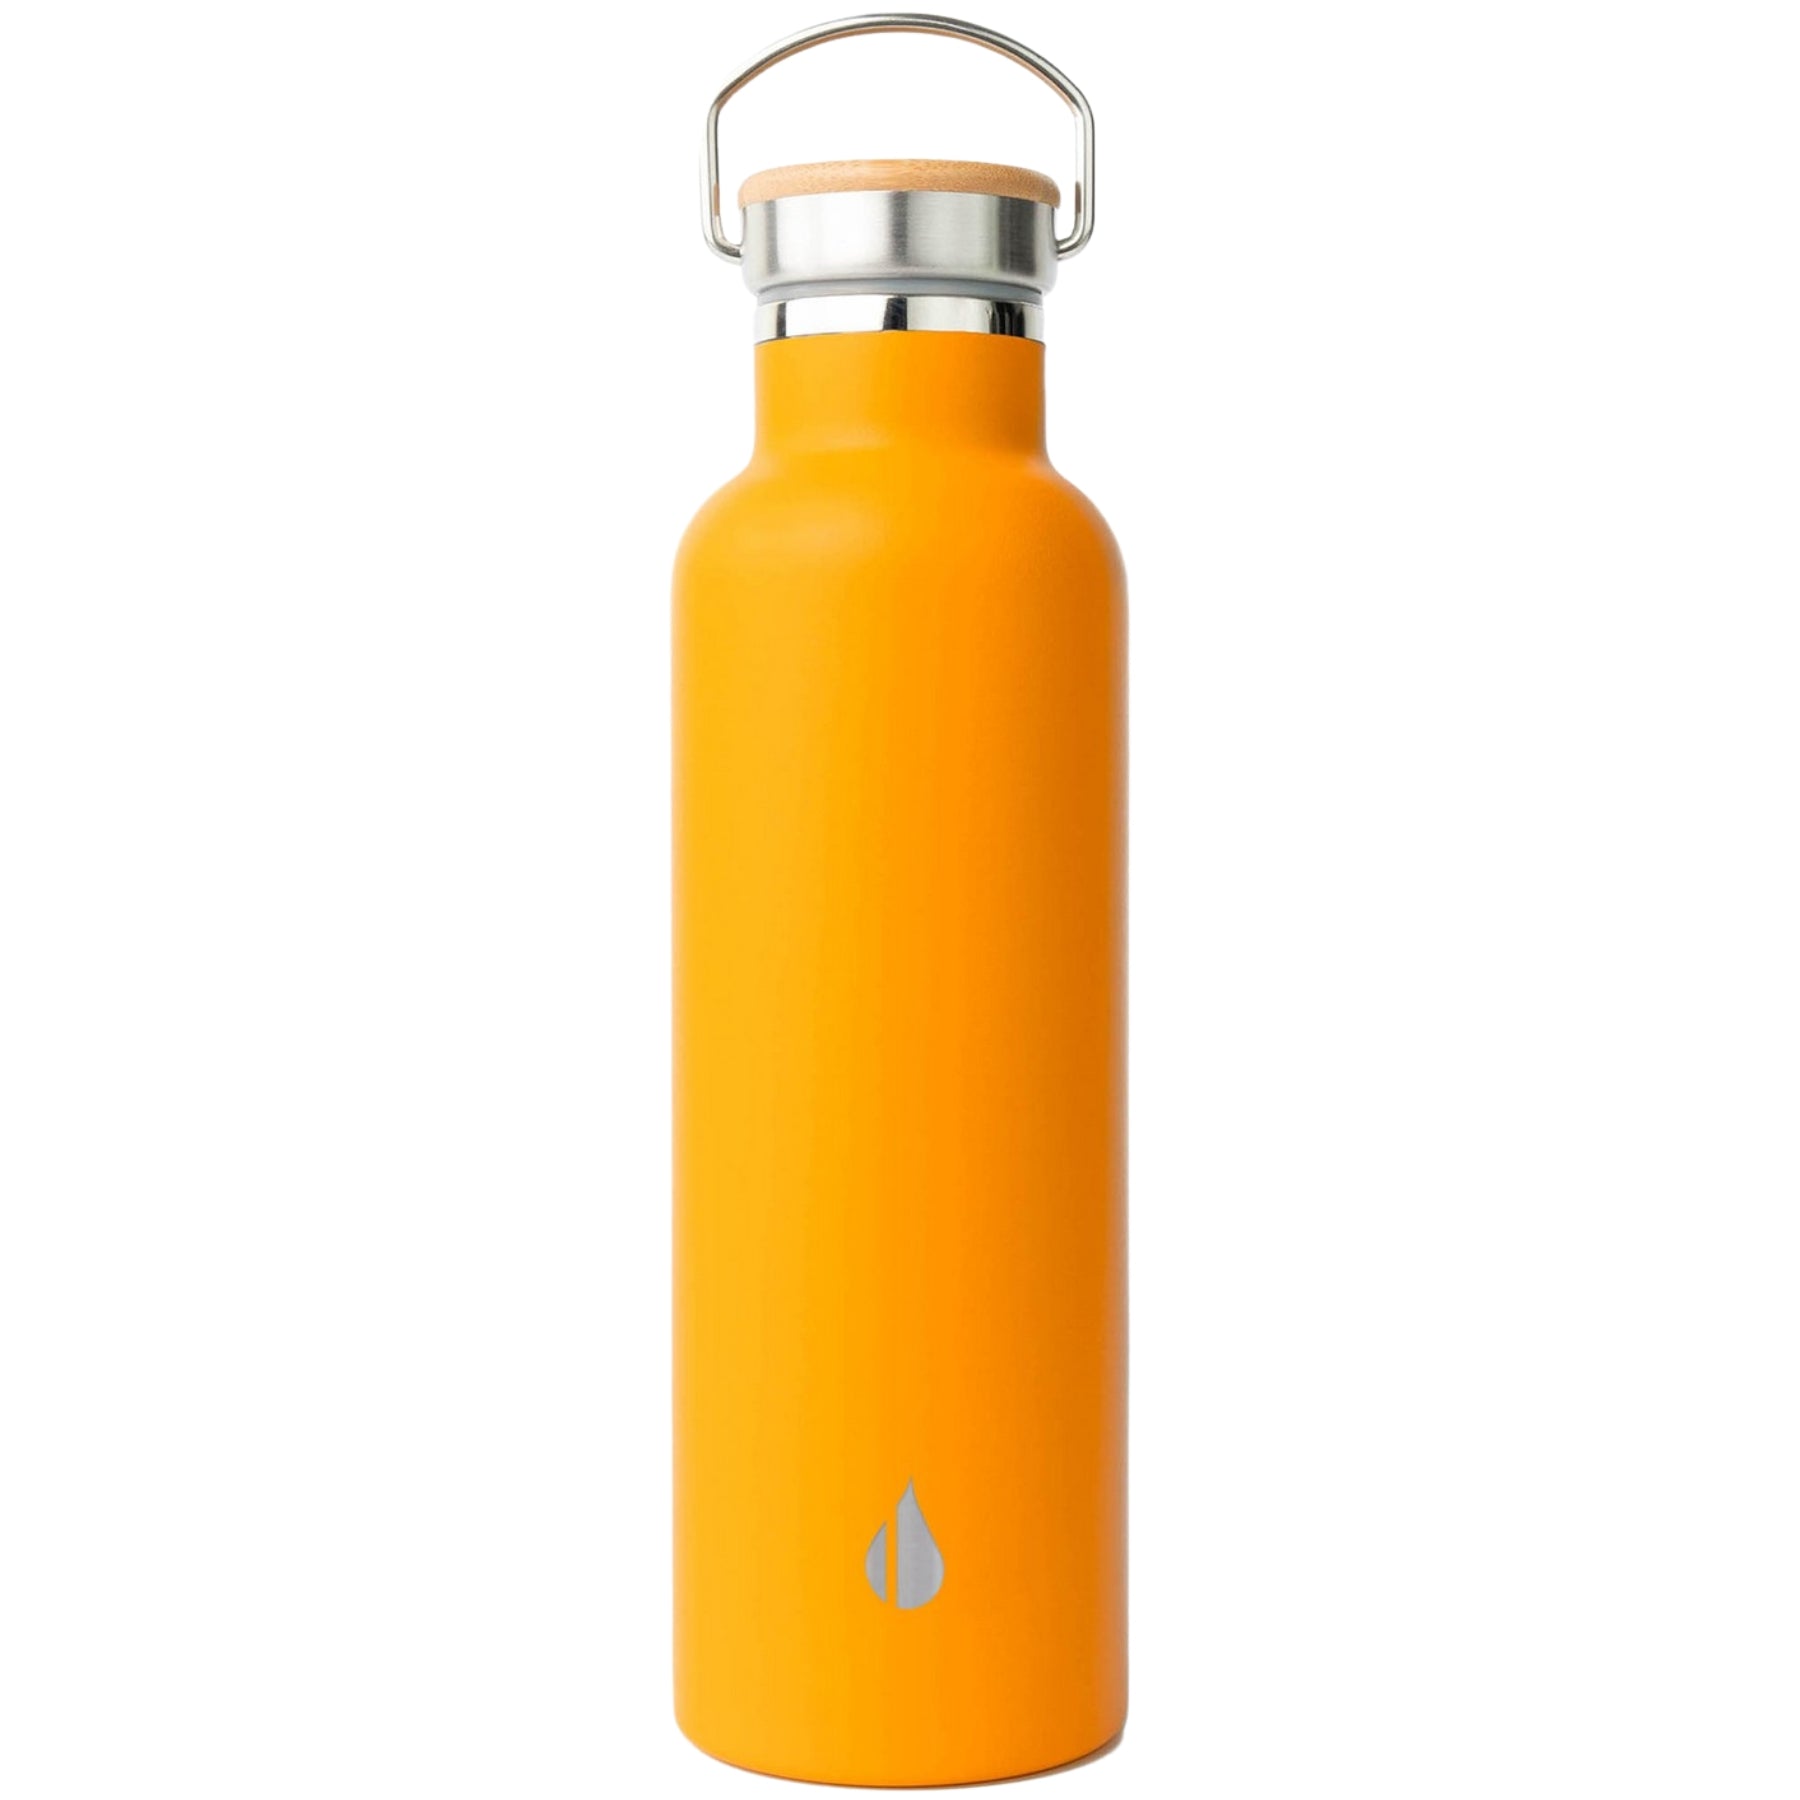 Customizable Elemental® 25 oz Stainless Steel Insulated Bottle in citrus